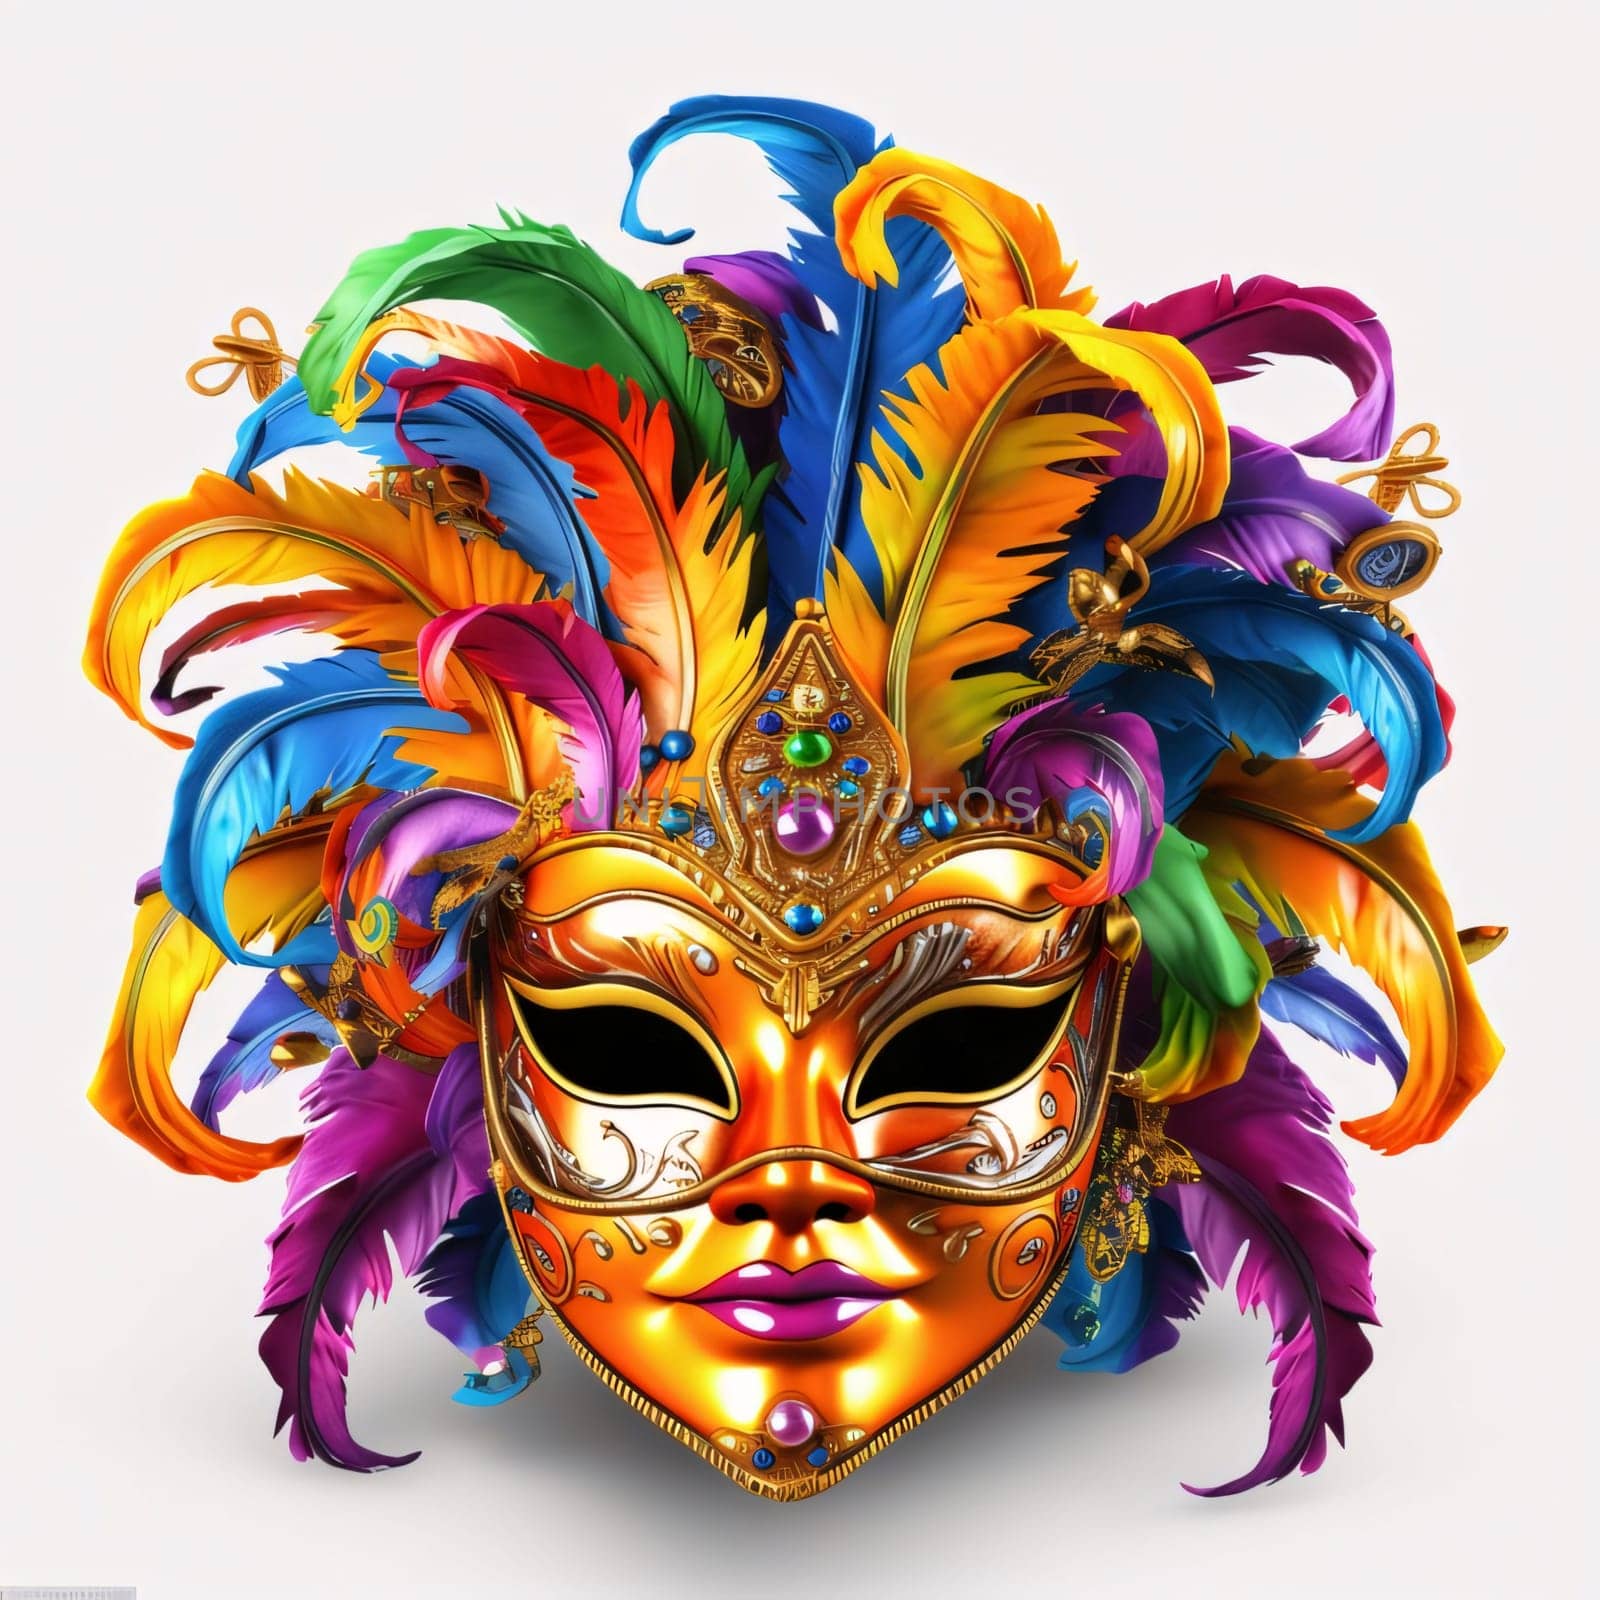 Gold carnival mask with colorful rainbow decorations, feathers on white isolated background. Carnival outfits, masks and decorations. by ThemesS